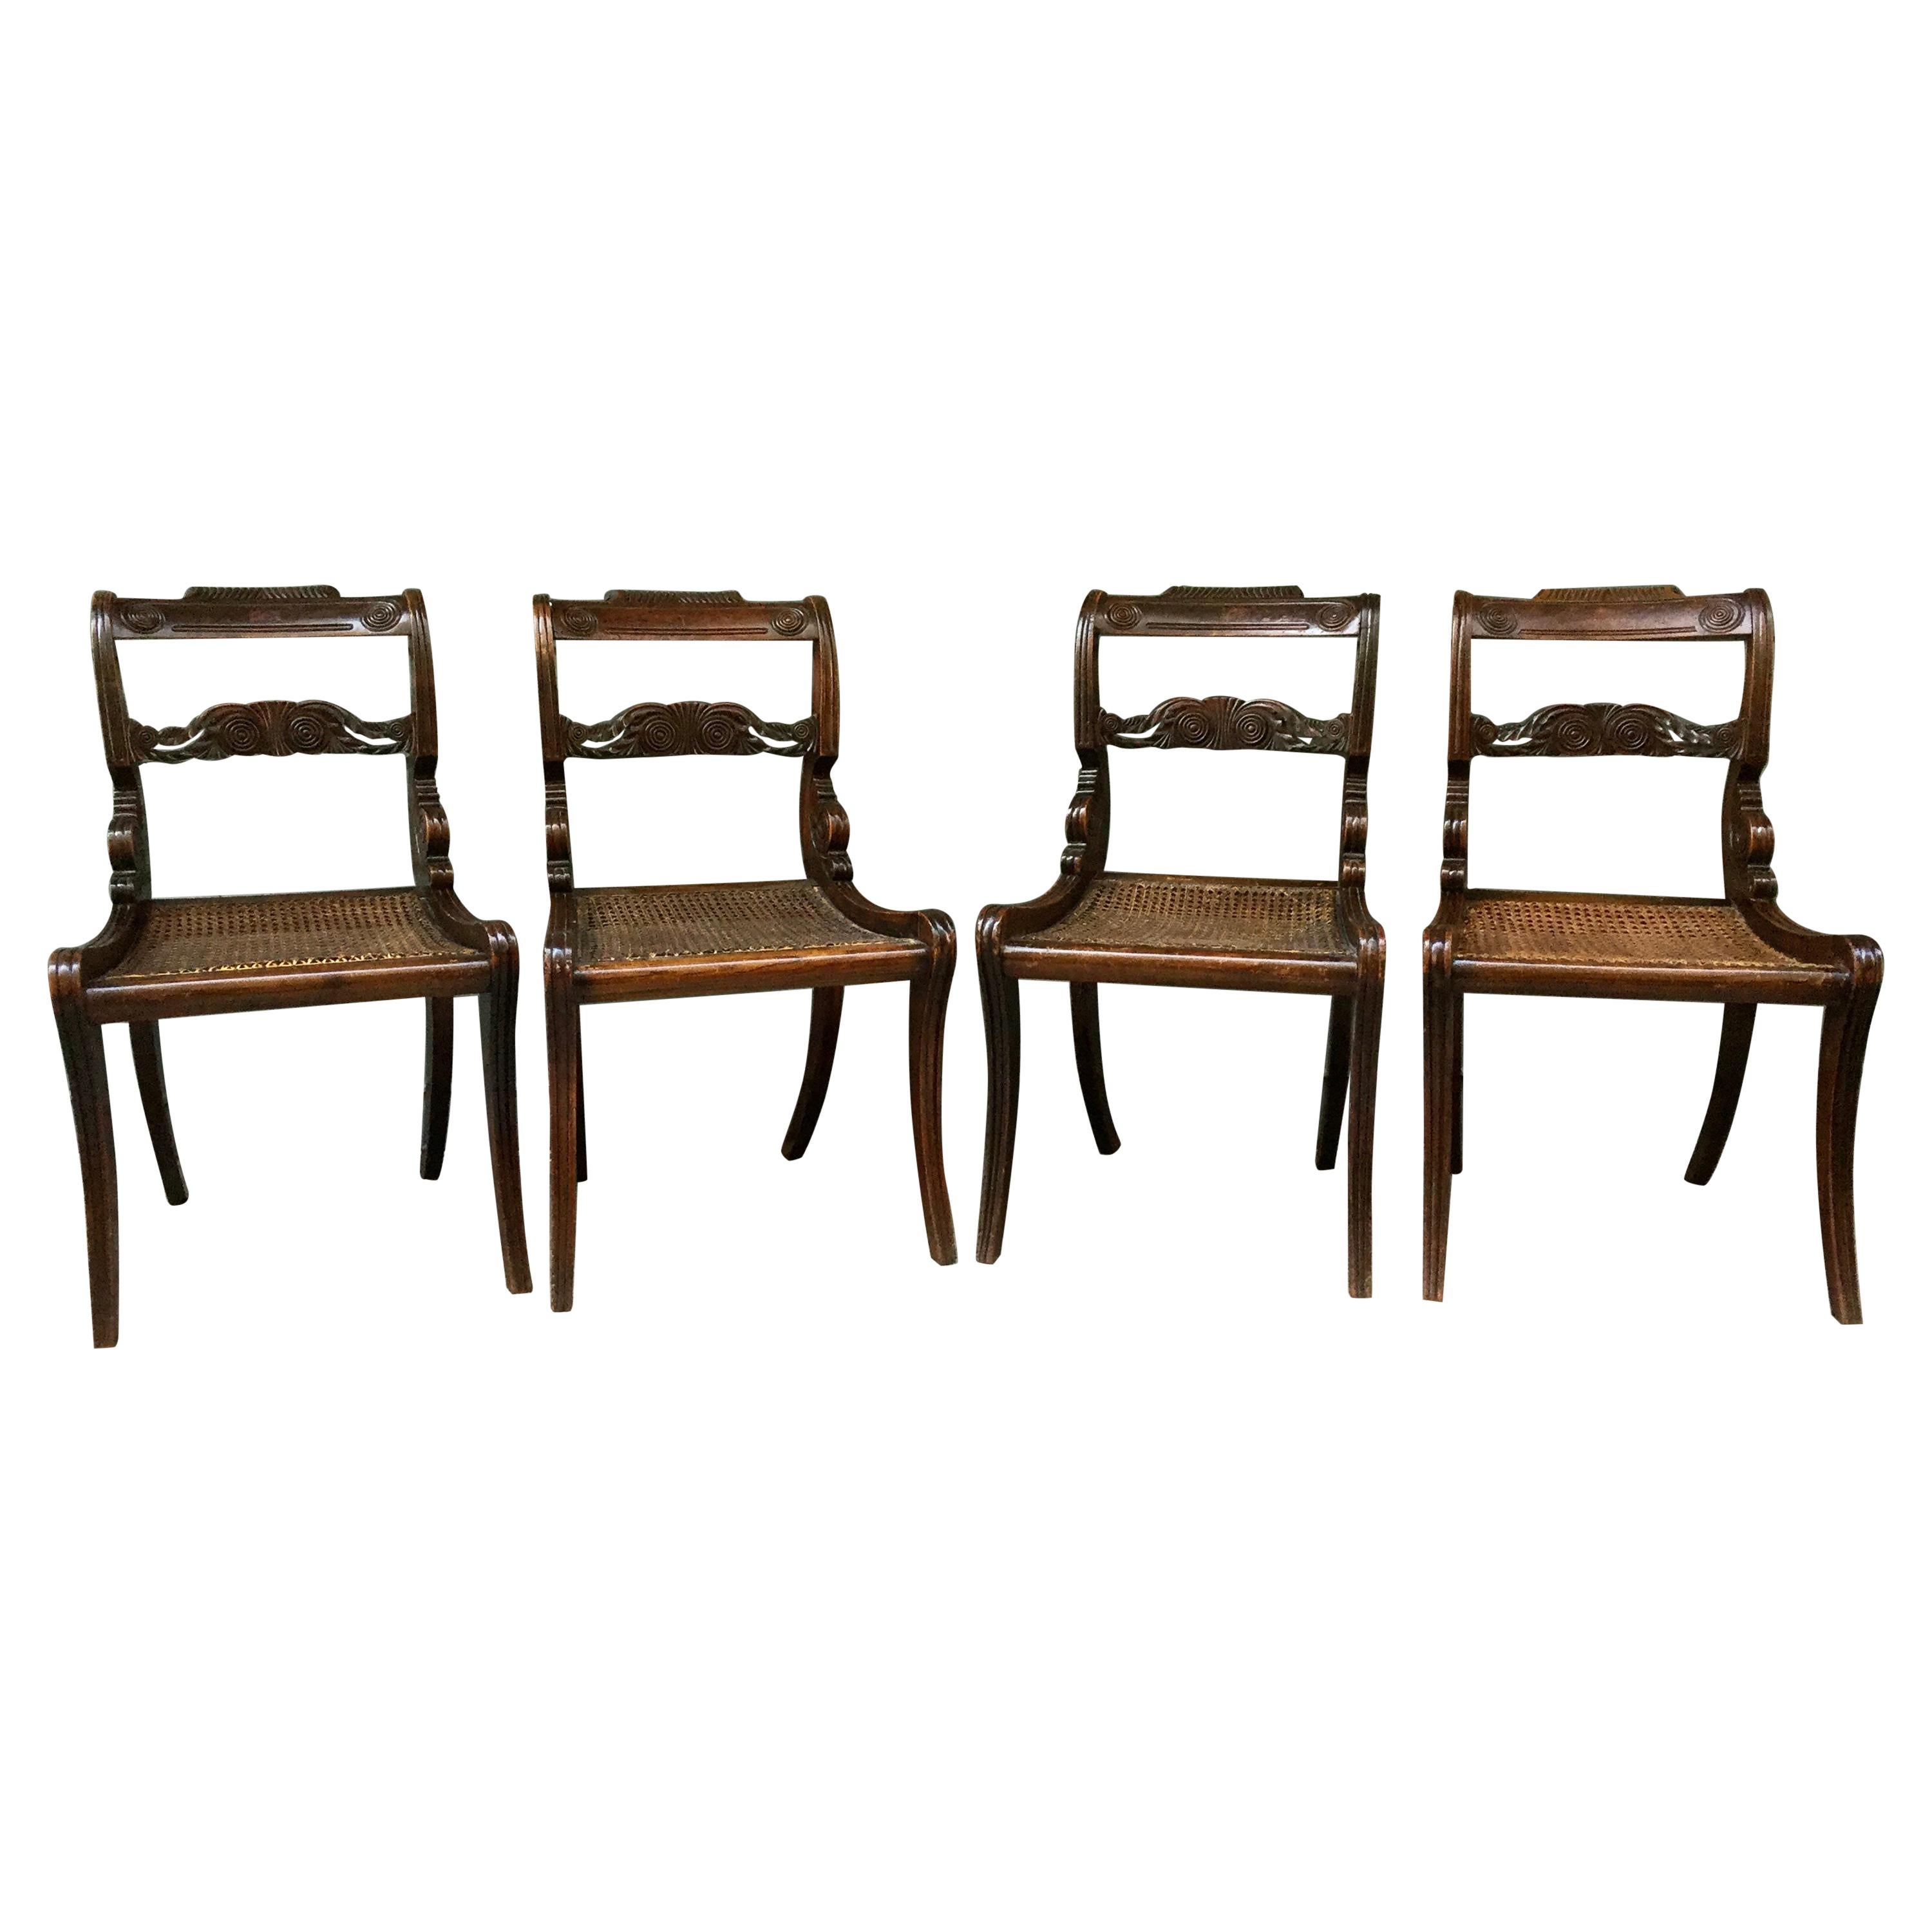 Early 19th Century Set of Four Regency Faux Grained Painted Cane Set Chairs